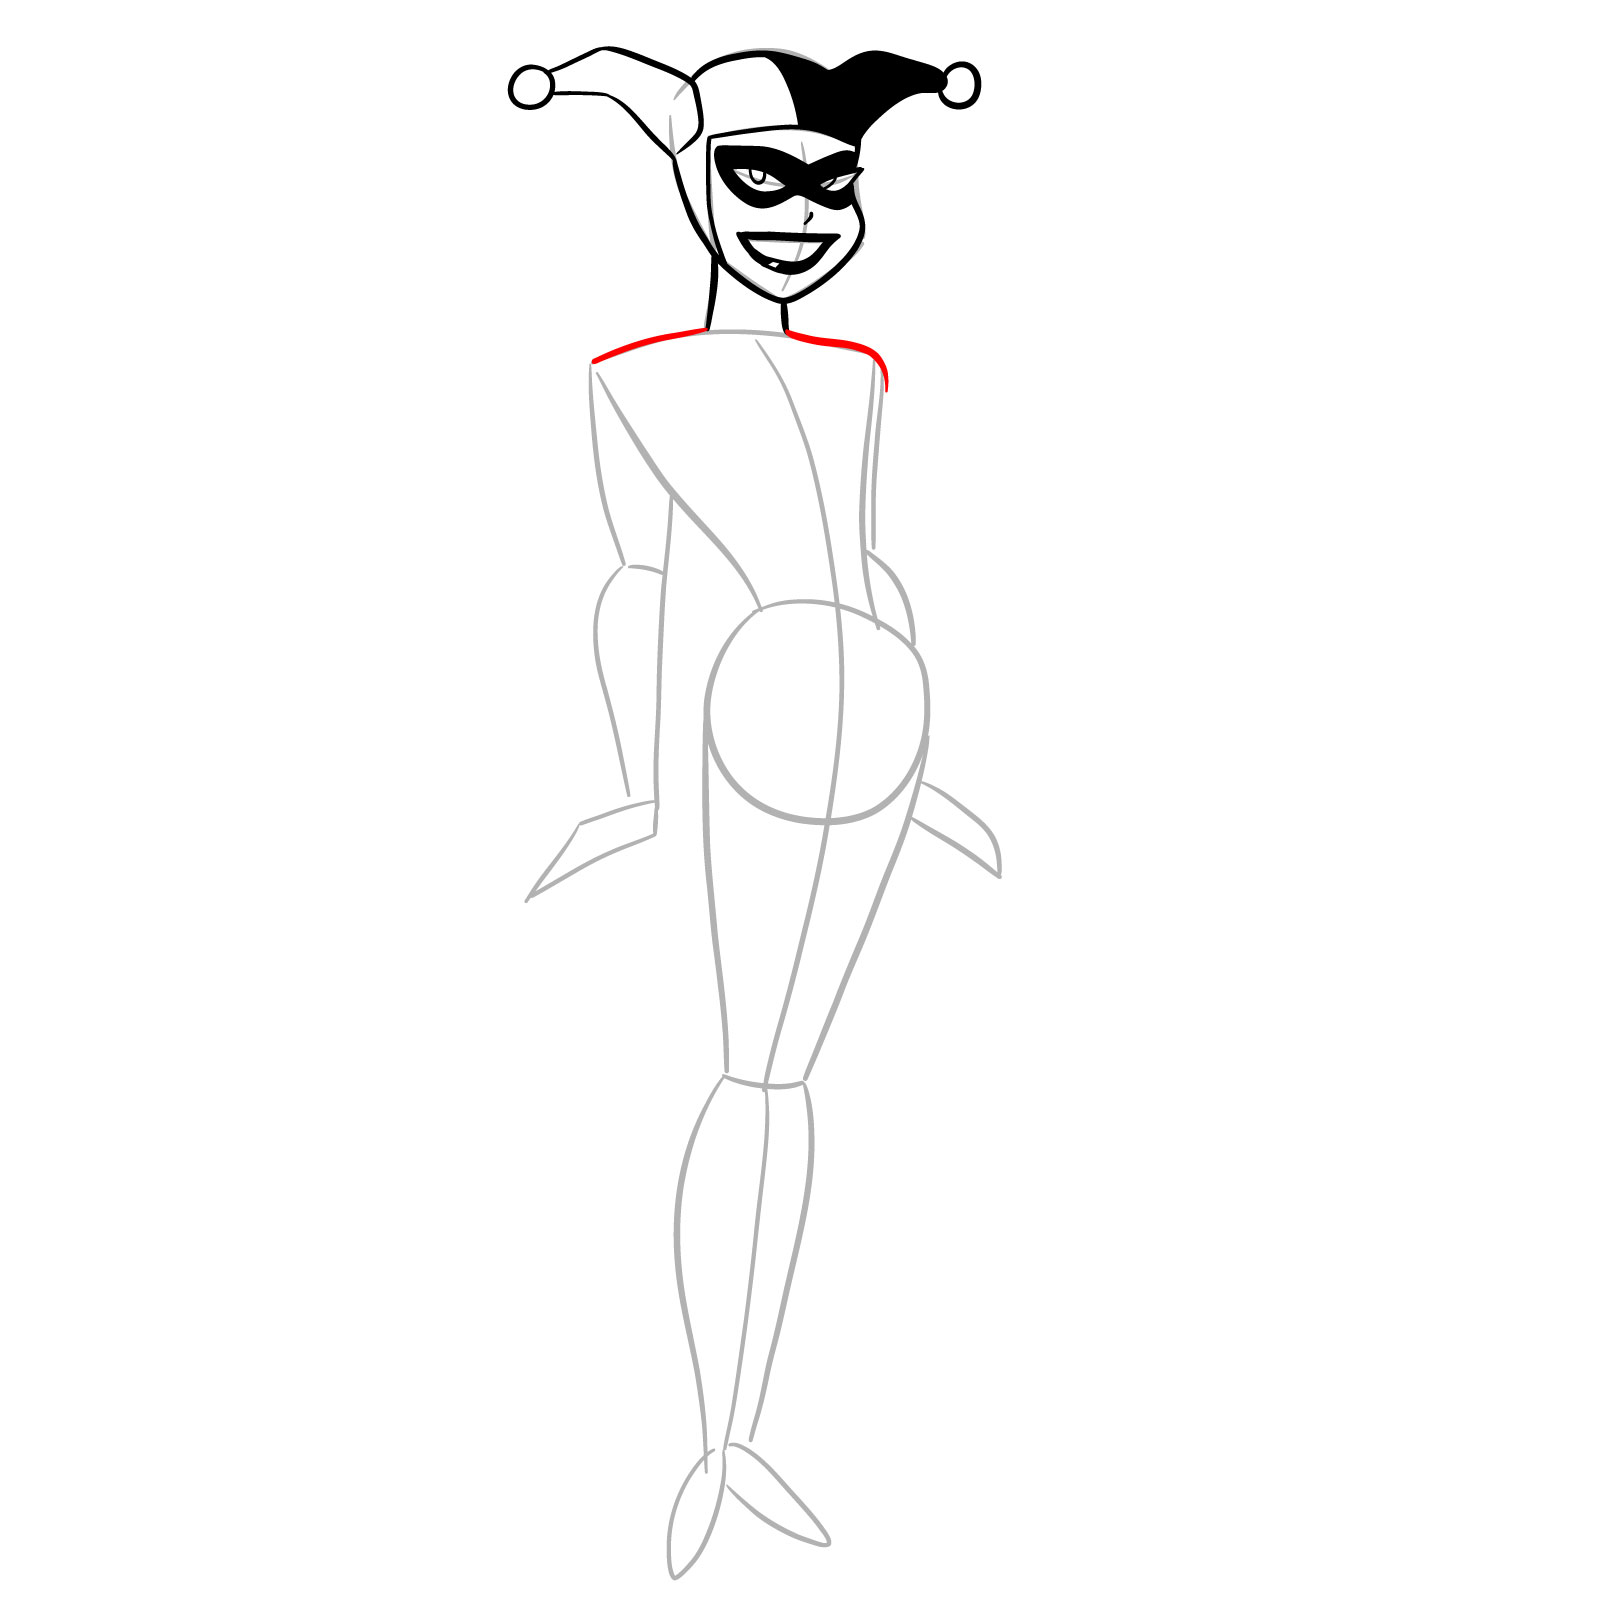 How to draw Harley Quinn in a classic suit - step 11